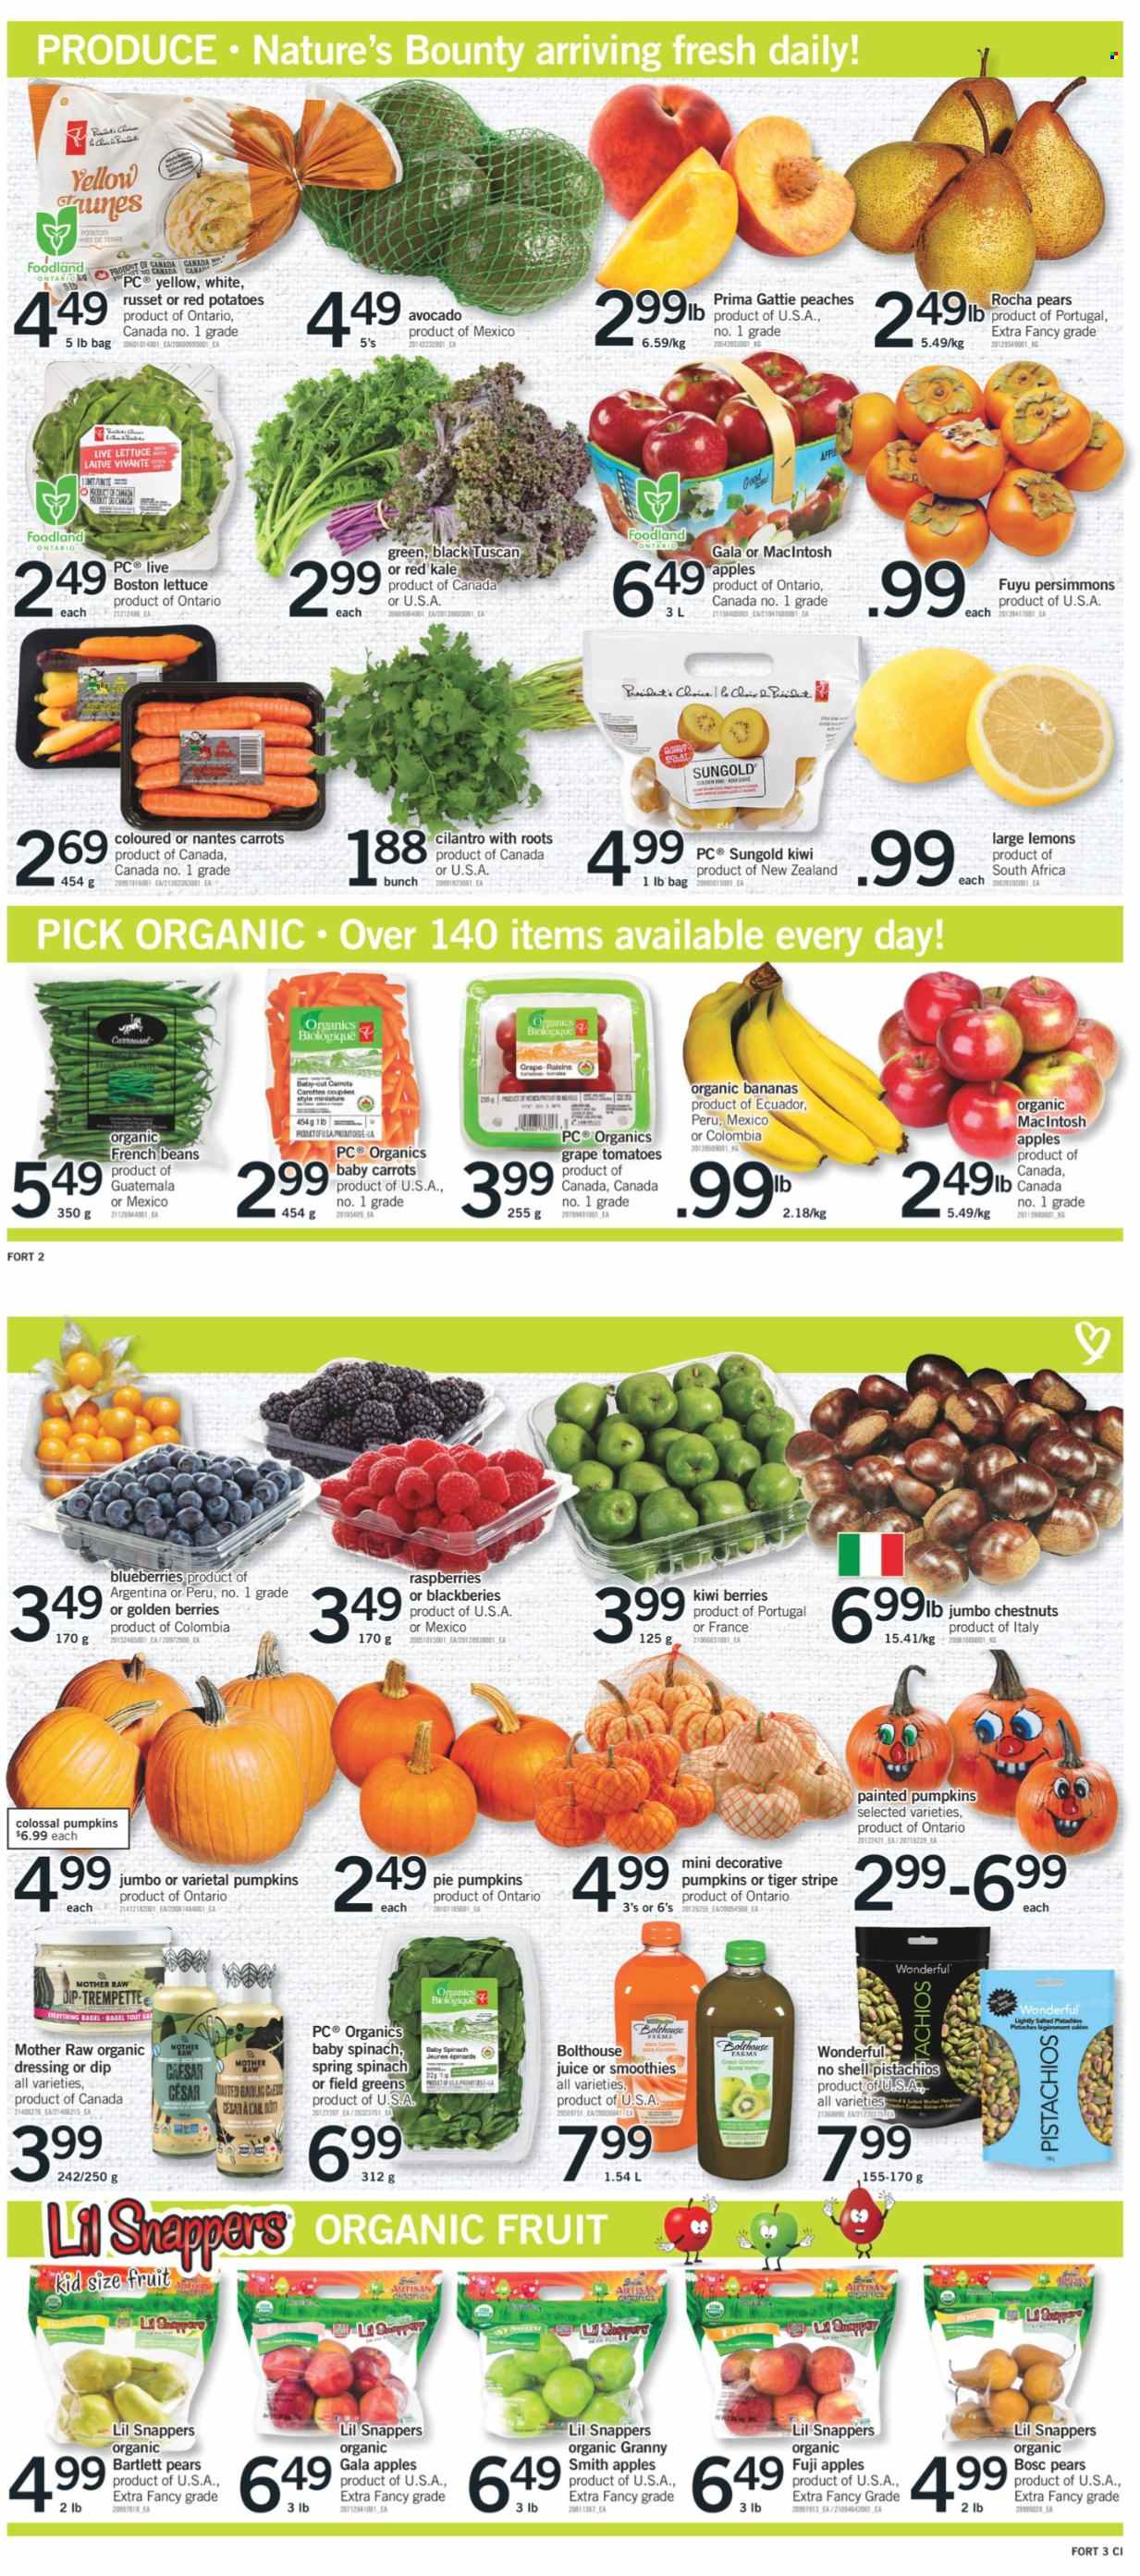 thumbnail - Fortinos Flyer - October 14, 2021 - October 20, 2021 - Sales products - bagels, pie, beans, carrots, french beans, russet potatoes, tomatoes, kale, potatoes, pumpkin, lettuce, red potatoes, apples, avocado, bananas, Bartlett pears, Gala, pears, persimmons, Fuji apple, organic bananas, lemons, peaches, Granny Smith, dip, cilantro, dressing, chestnuts, dried fruit, pistachios, juice, Shell, Nature's Bounty, kiwi, raisins. Page 2.